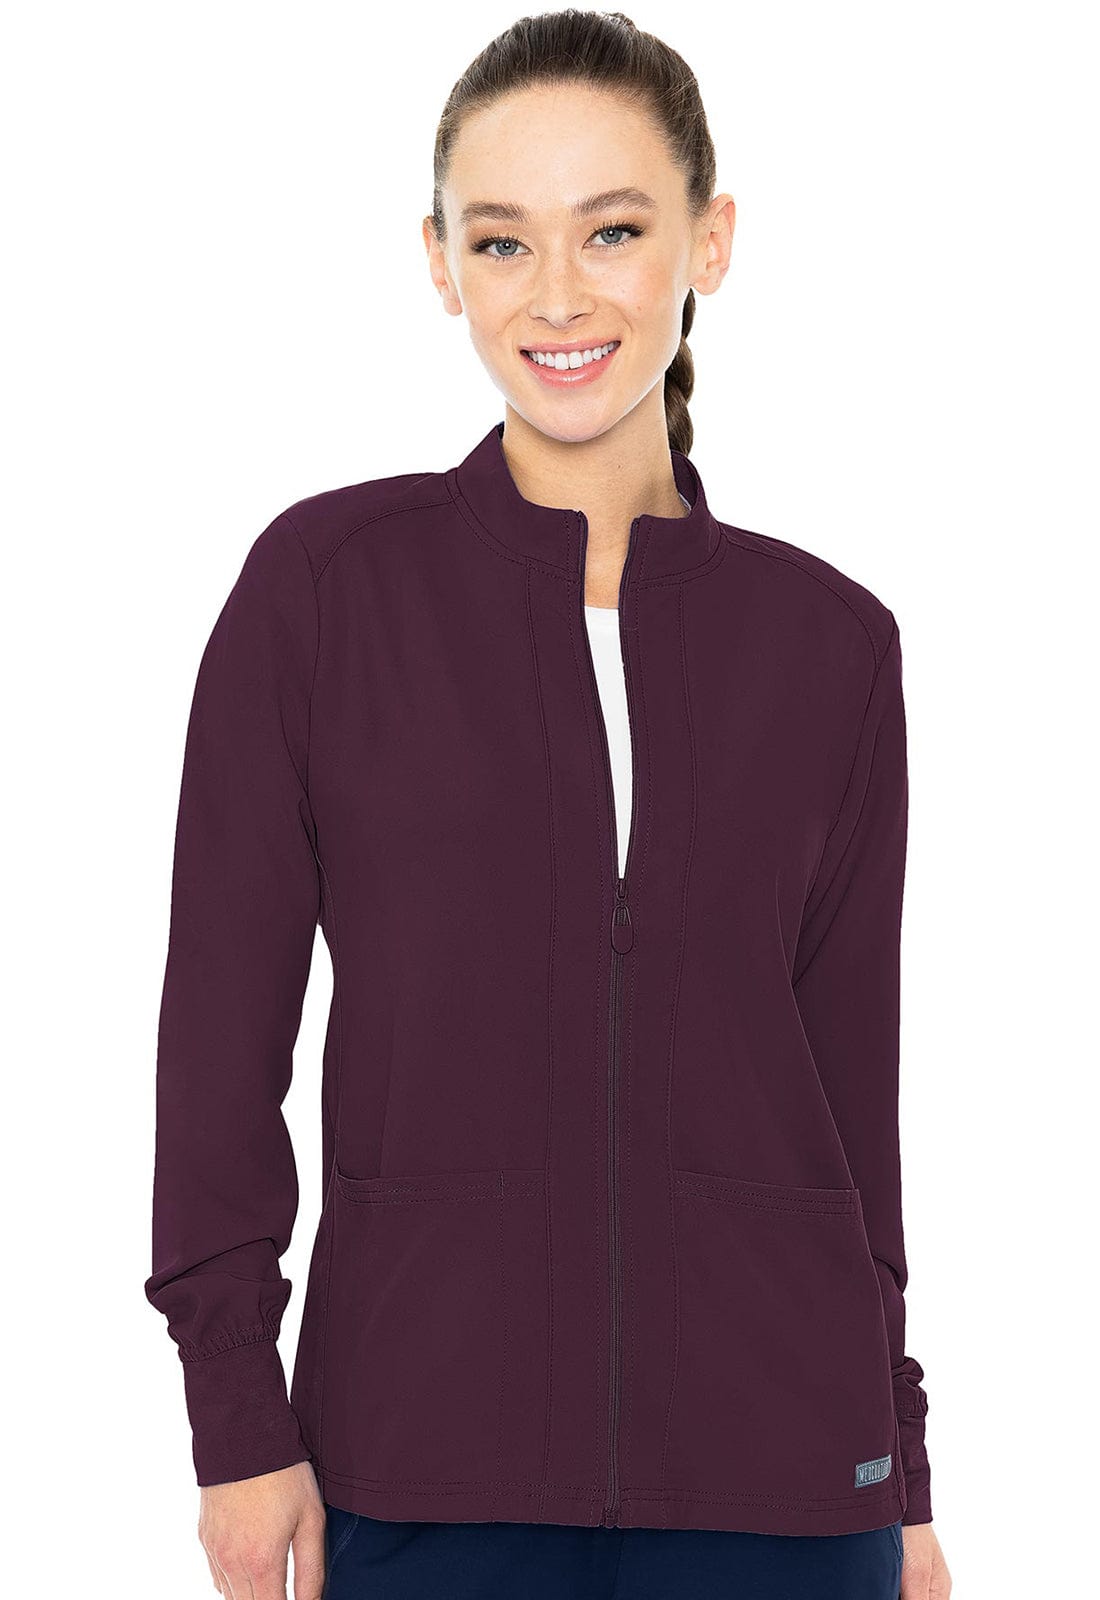 Med Couture MC Insight Wine / 2XL MC Insight  Zip Front Warm-Up Scrub Jacket With Shoulder Yokes MC2660